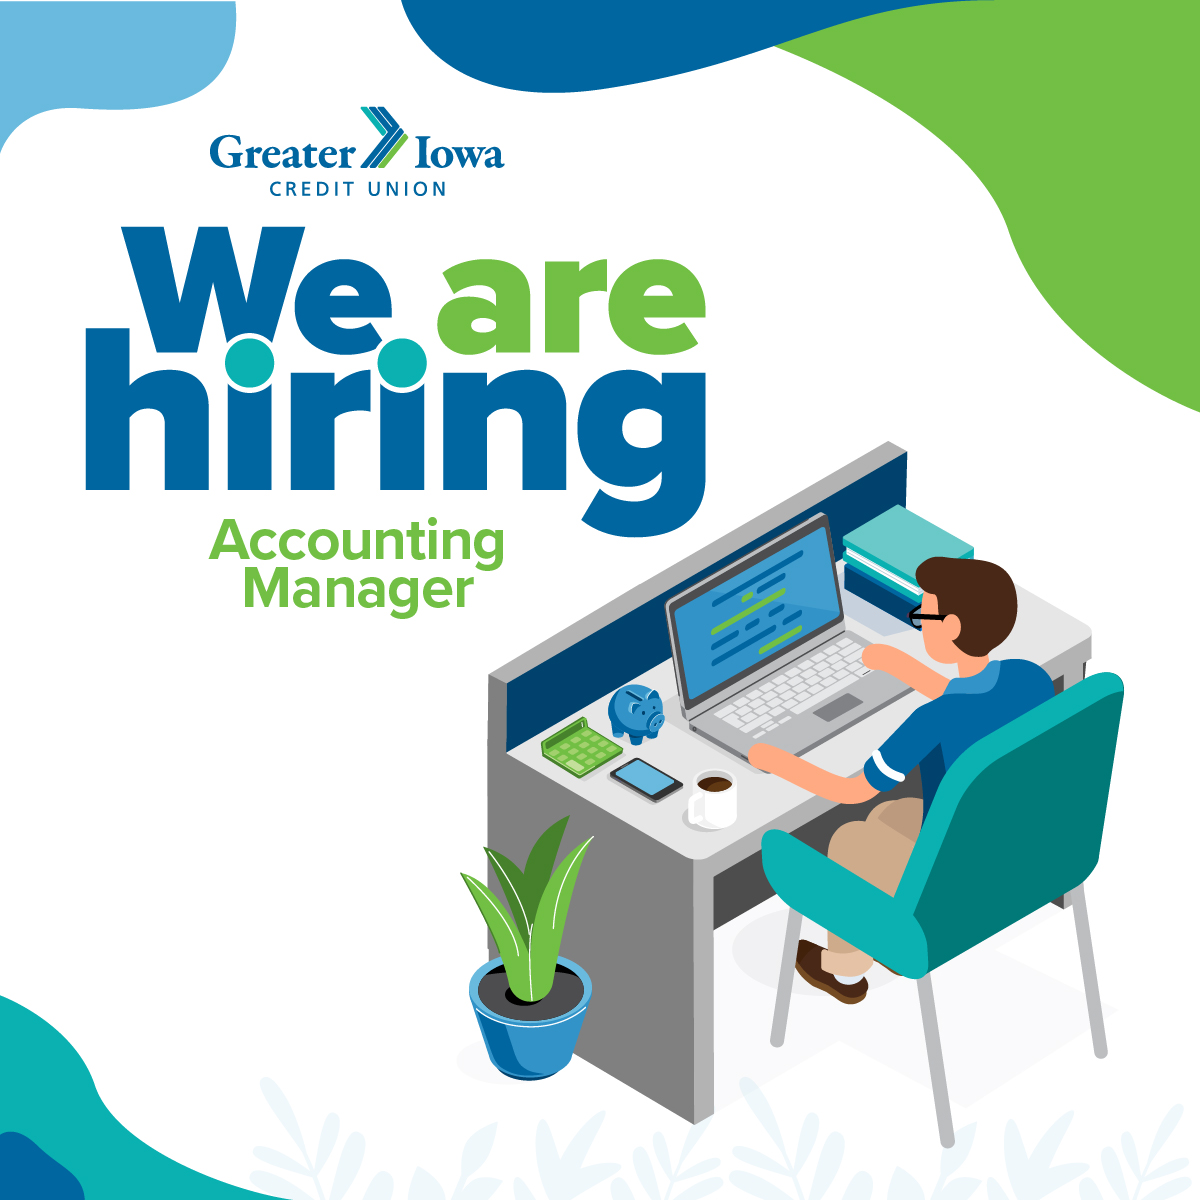 We are hiring Accounting Manager